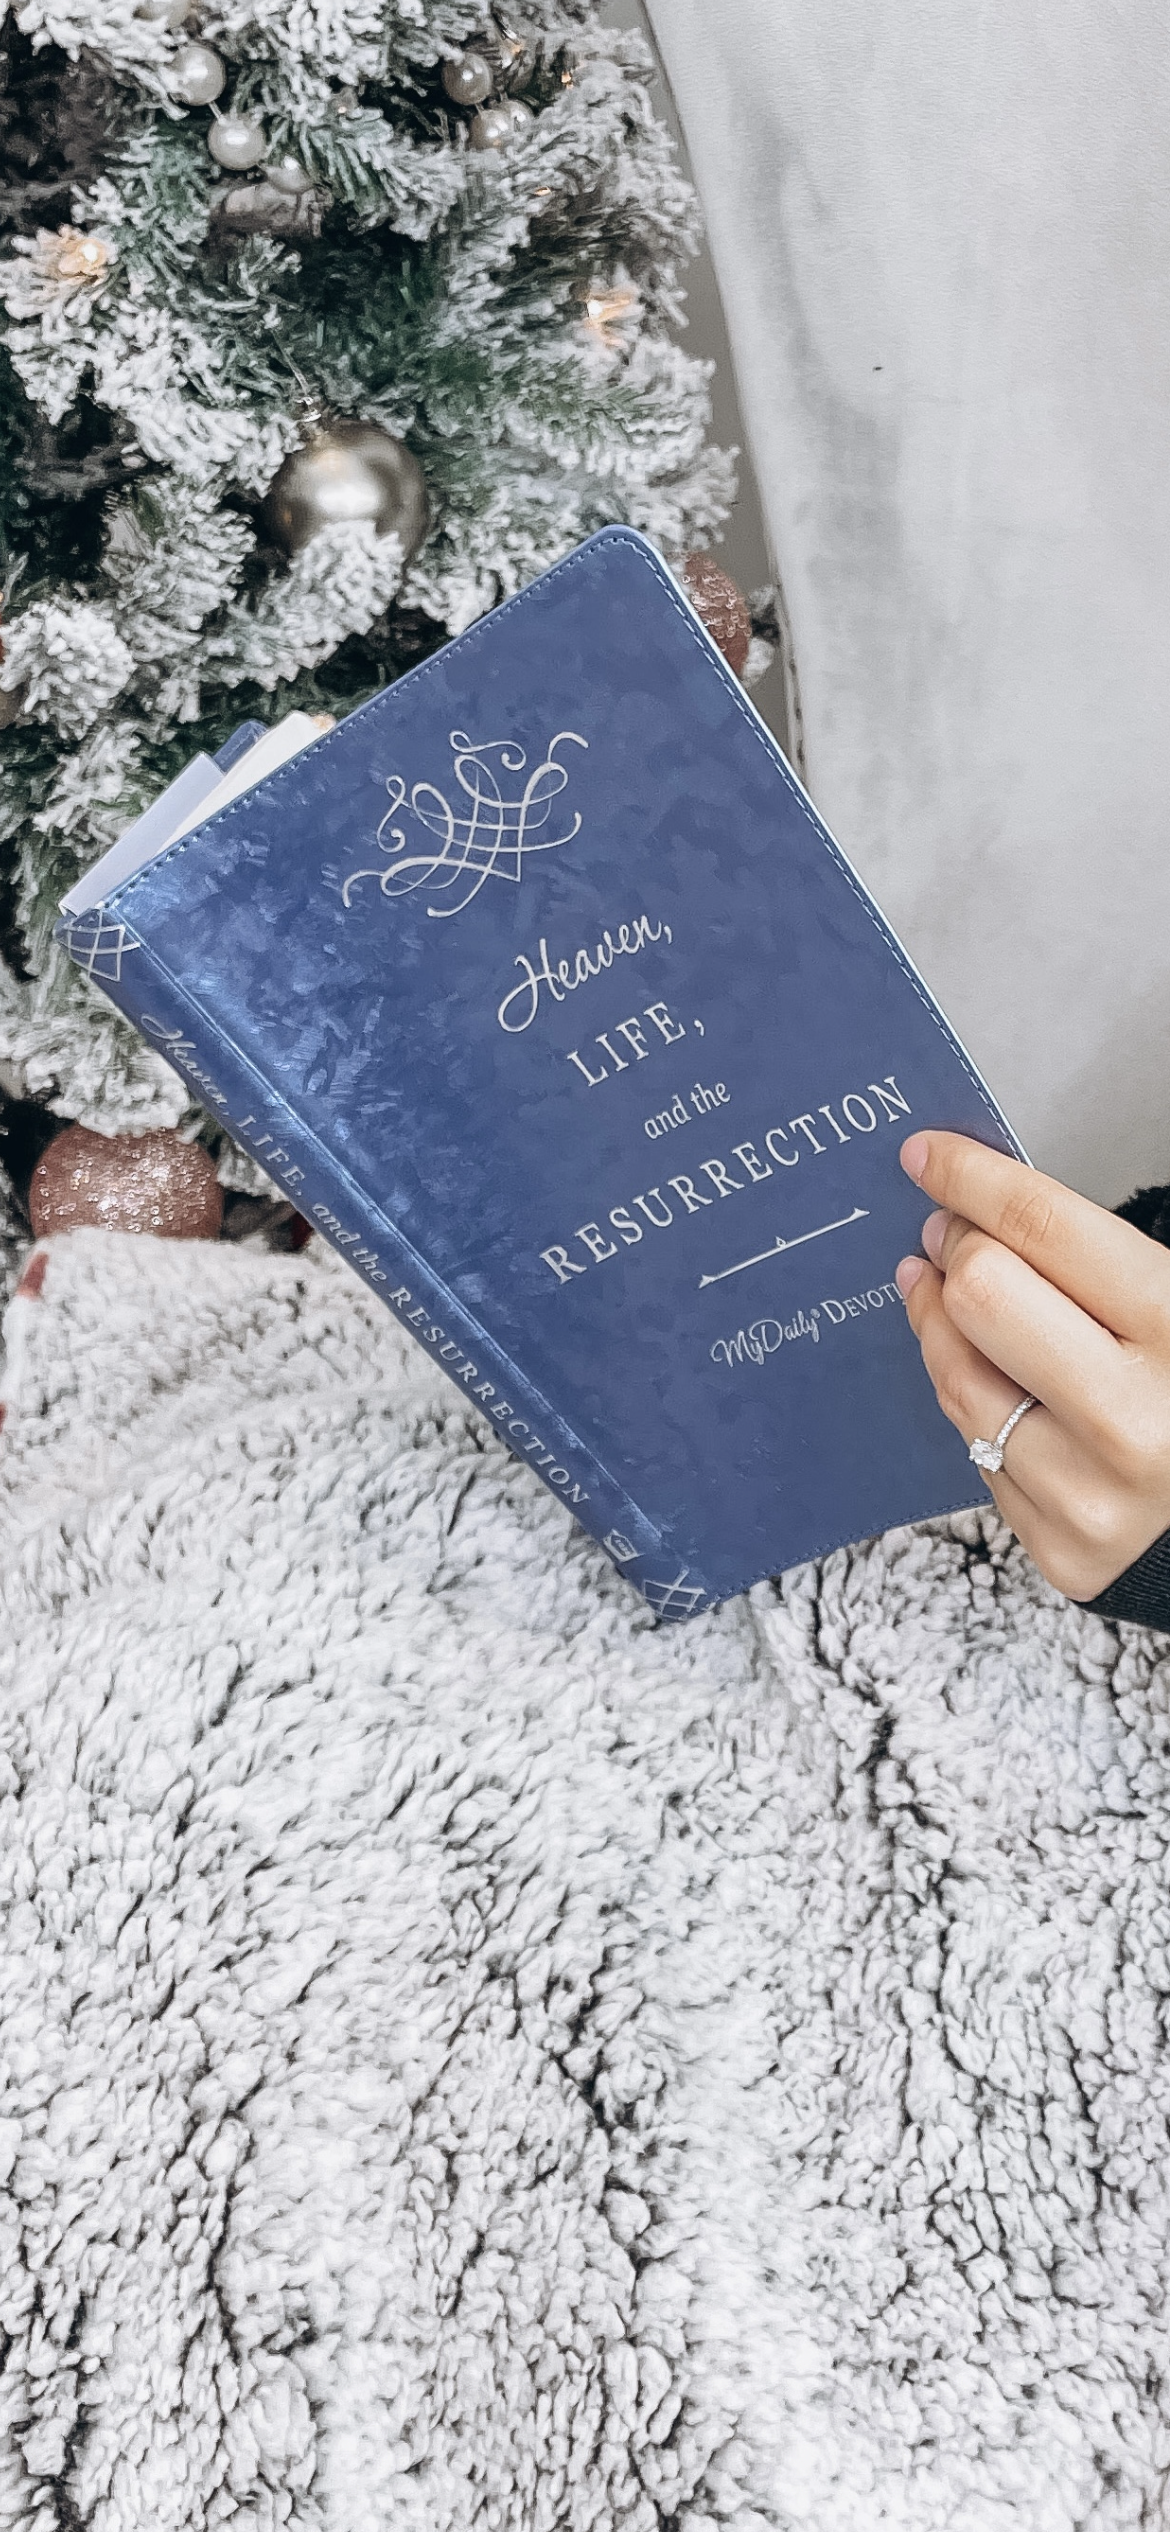 Heaven, Life, and the Resurrection Daily Devotional